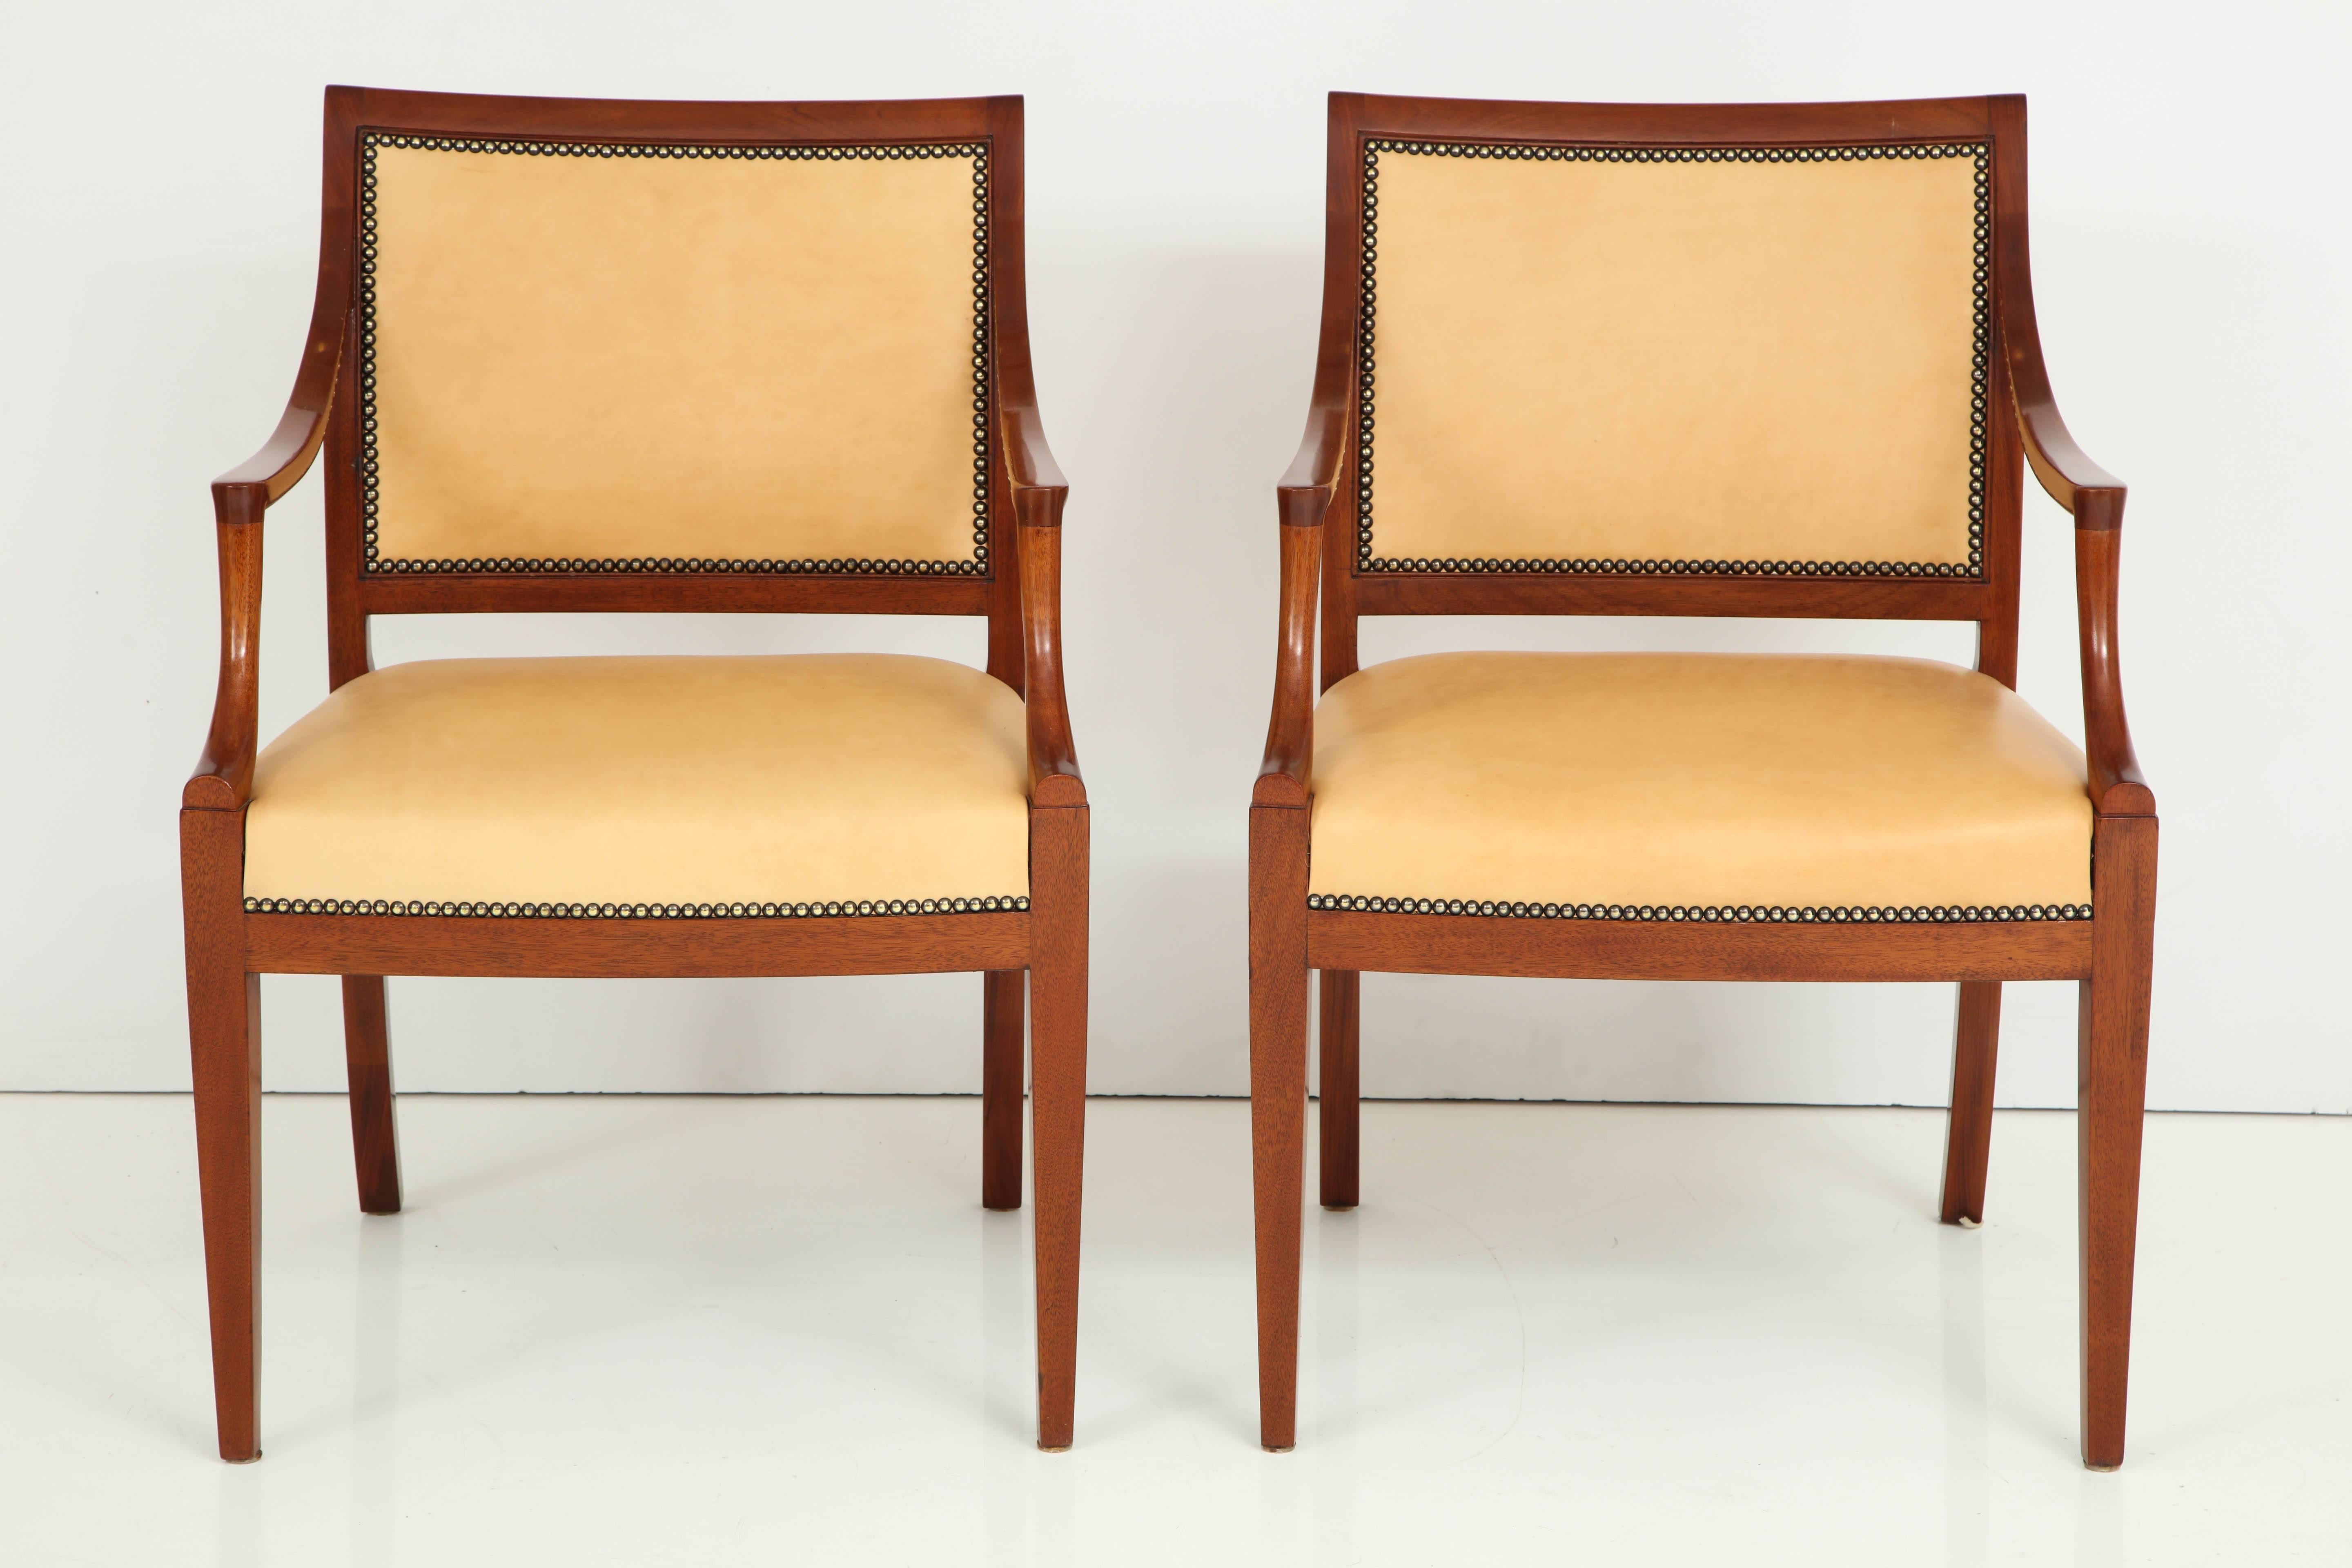 Scandinavian Modern Pair of Frits Henningsen Mahogany and Leather Open Armchair, circa 1940s